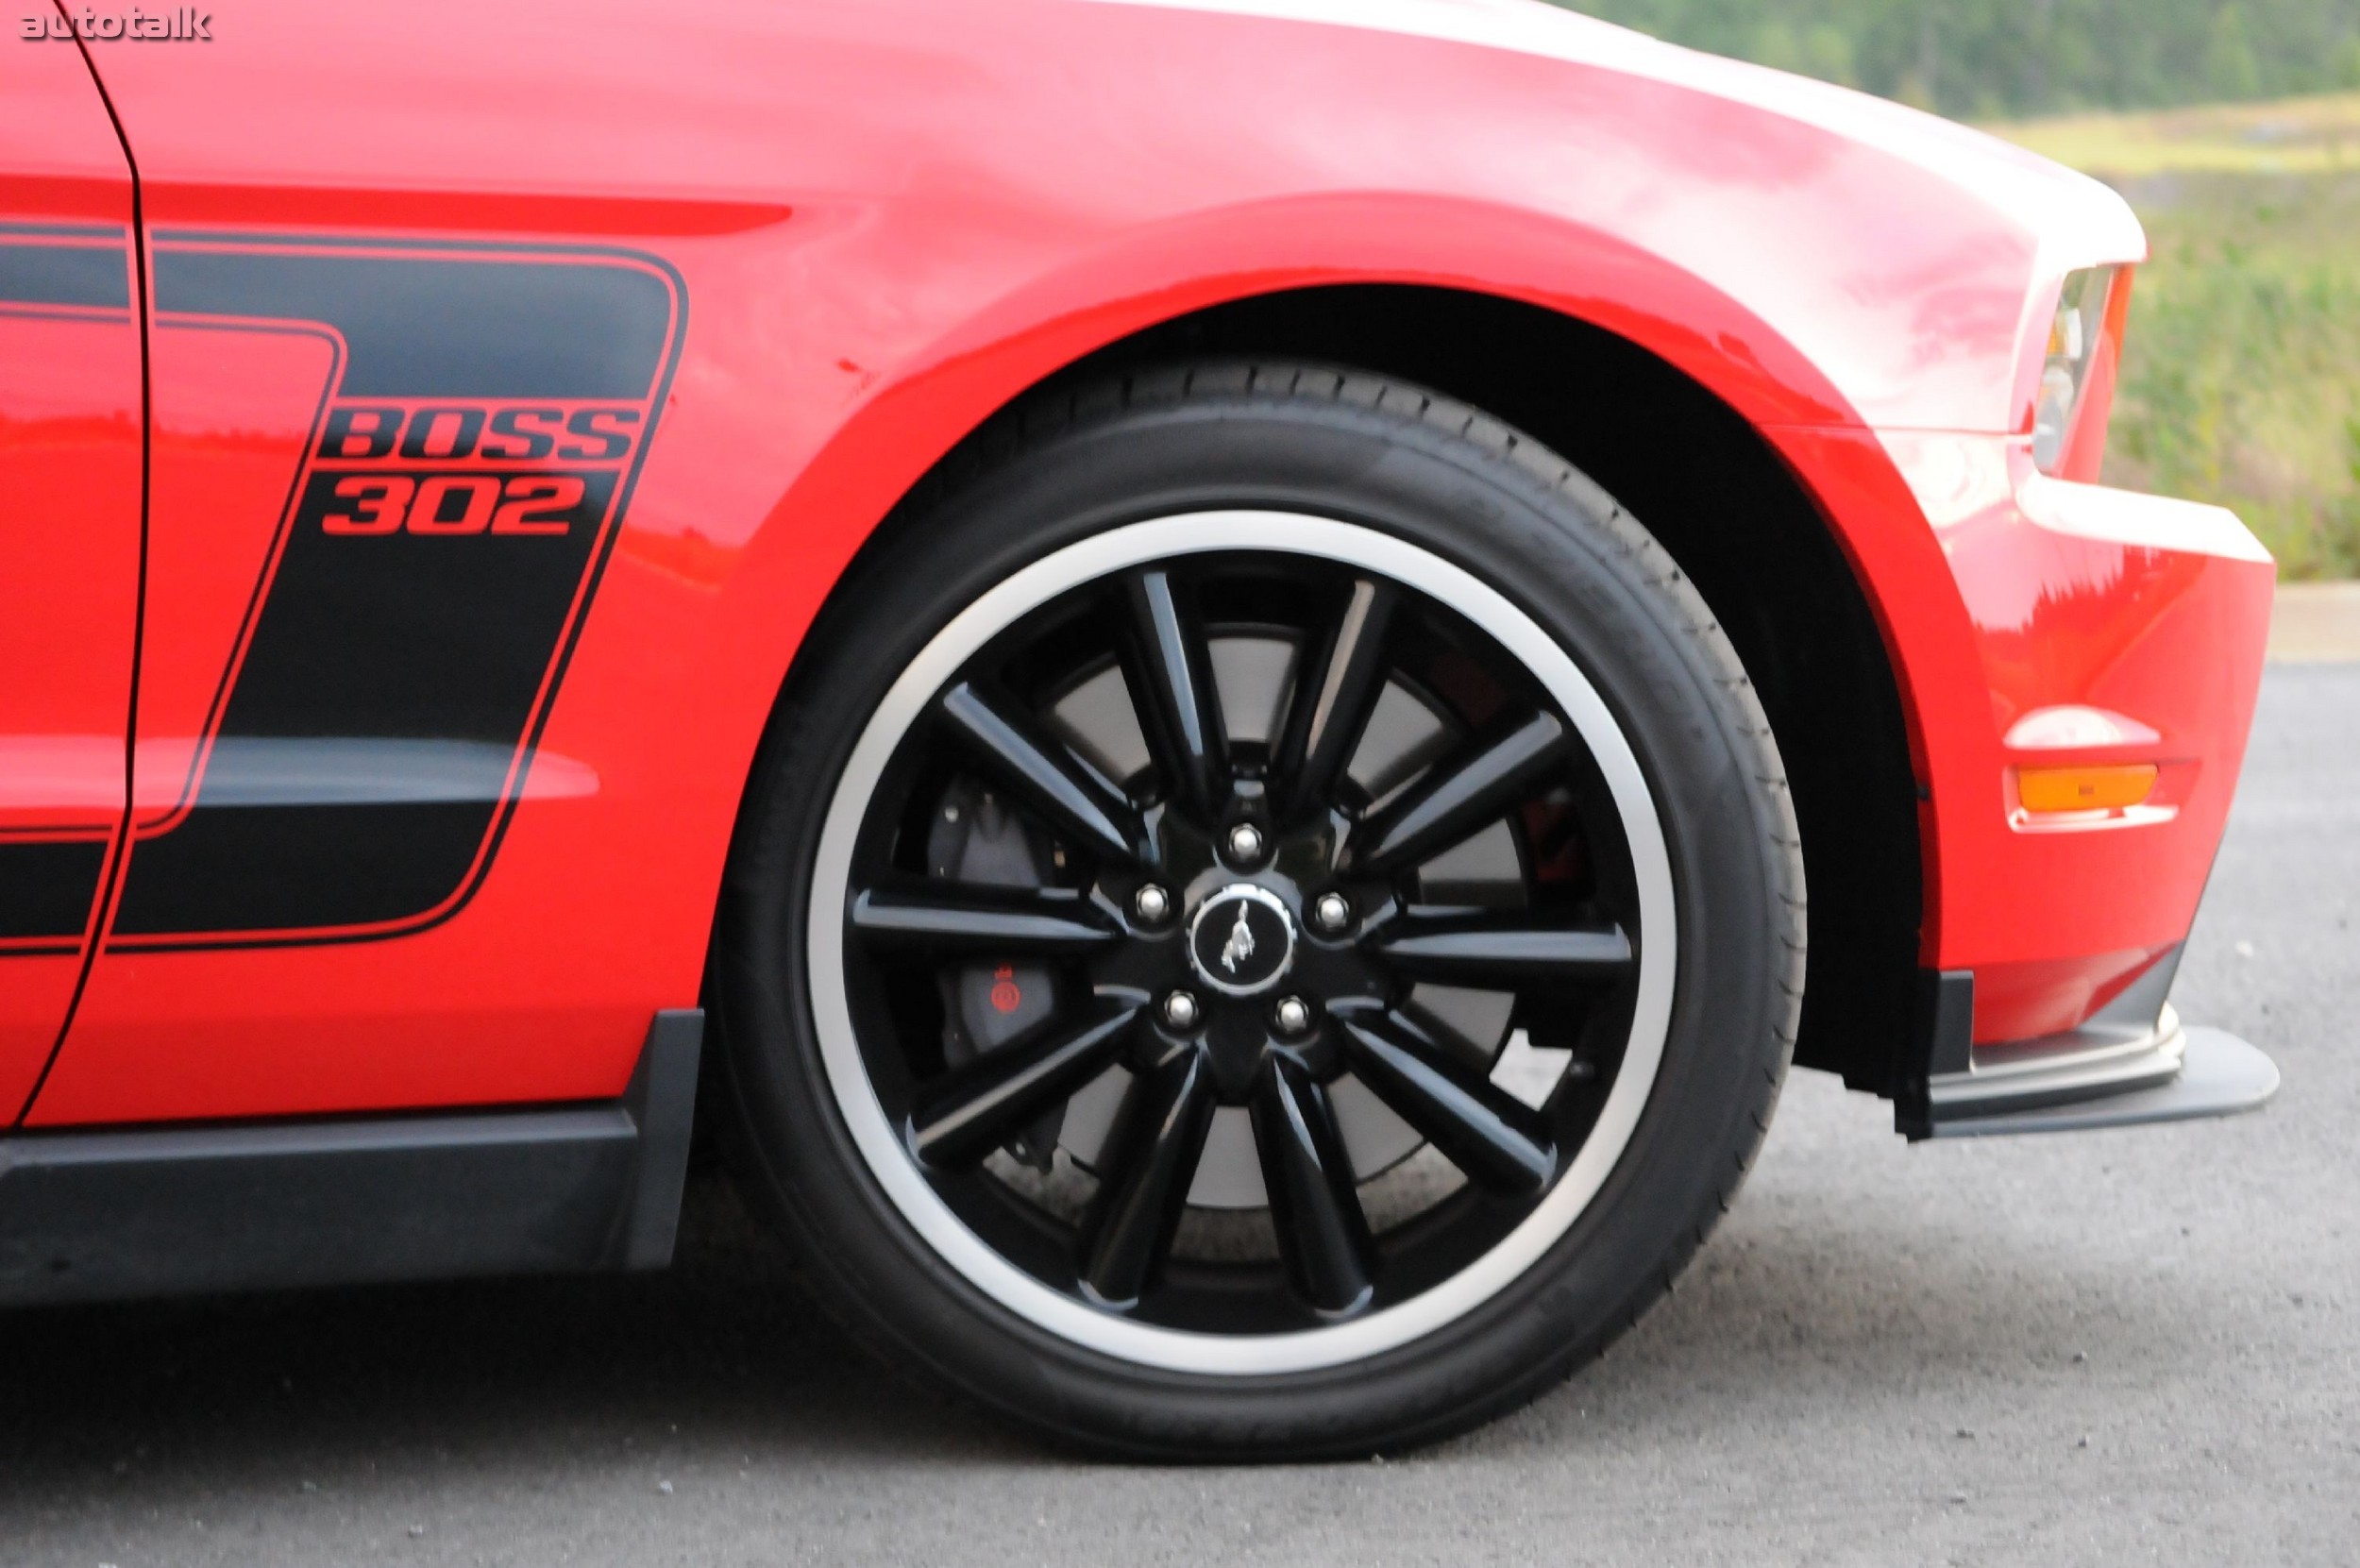 2011 Ford Mustang BOSS 302 Review